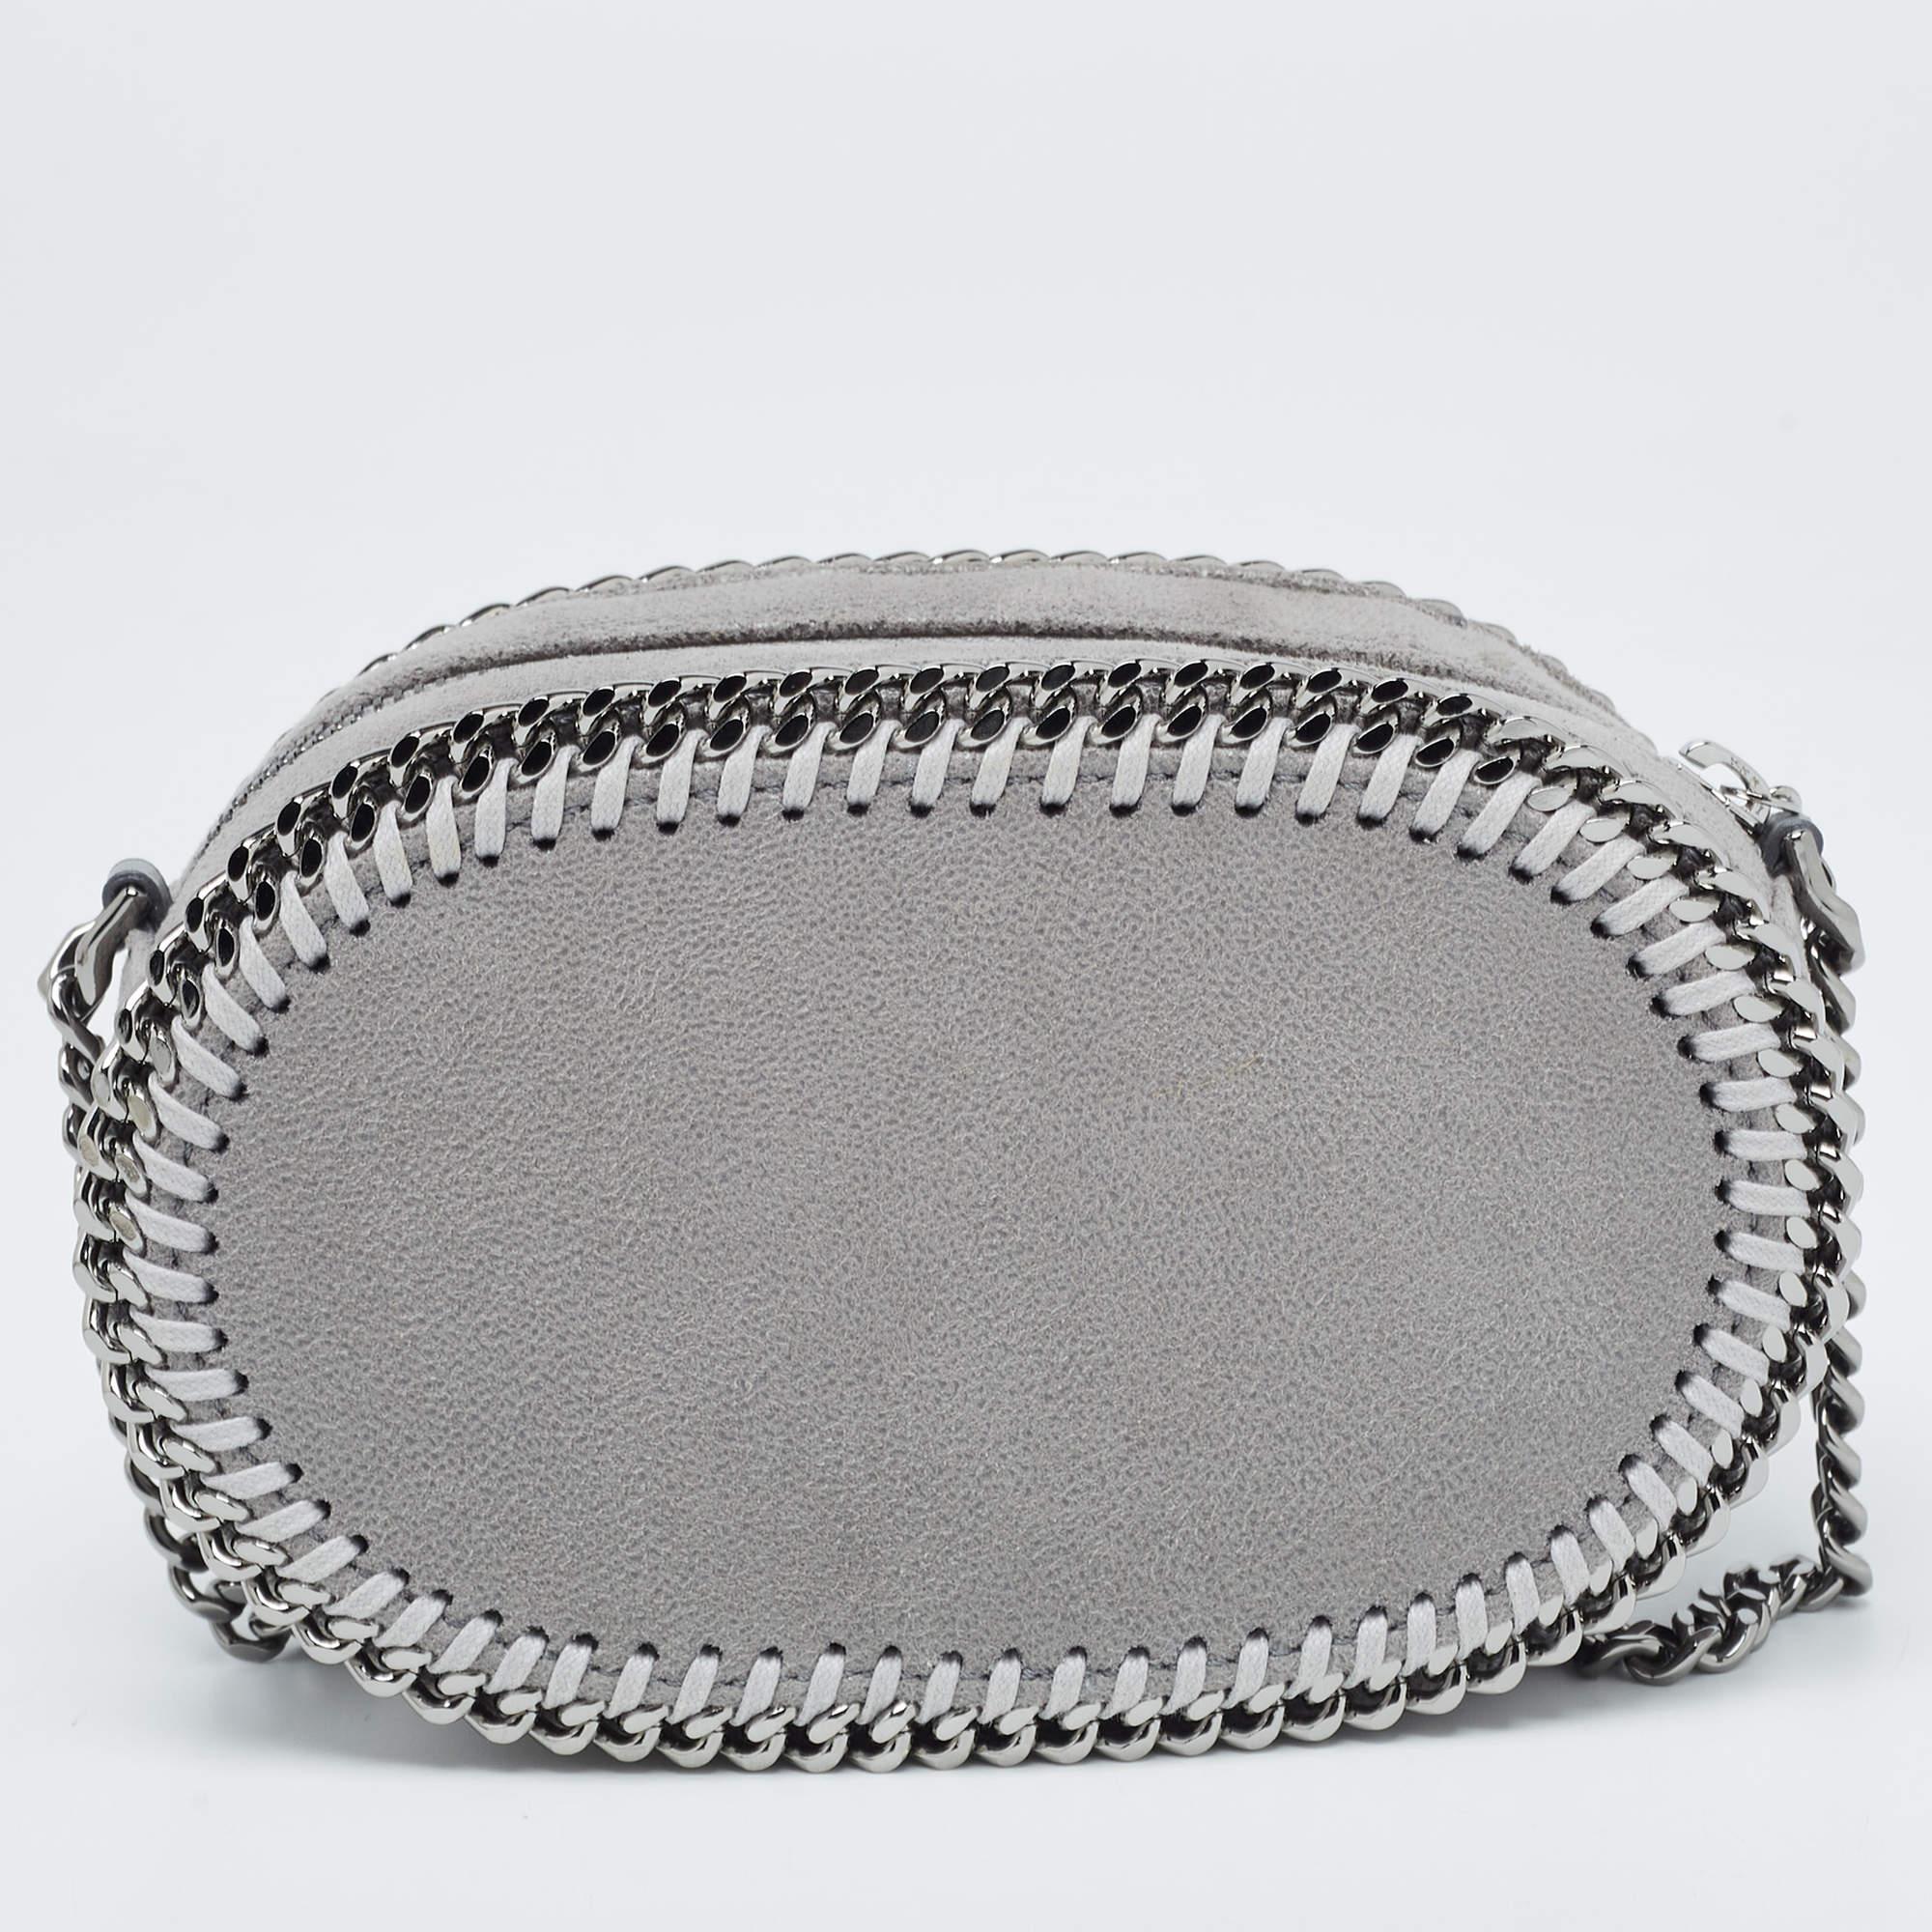 The Stella McCartney Falabella Crossbody Bag epitomizes sustainable luxury. Crafted with cruelty-free materials, its sleek oval silhouette and signature chain trim exude sophistication. The muted grey hue complements any outfit, while the crossbody